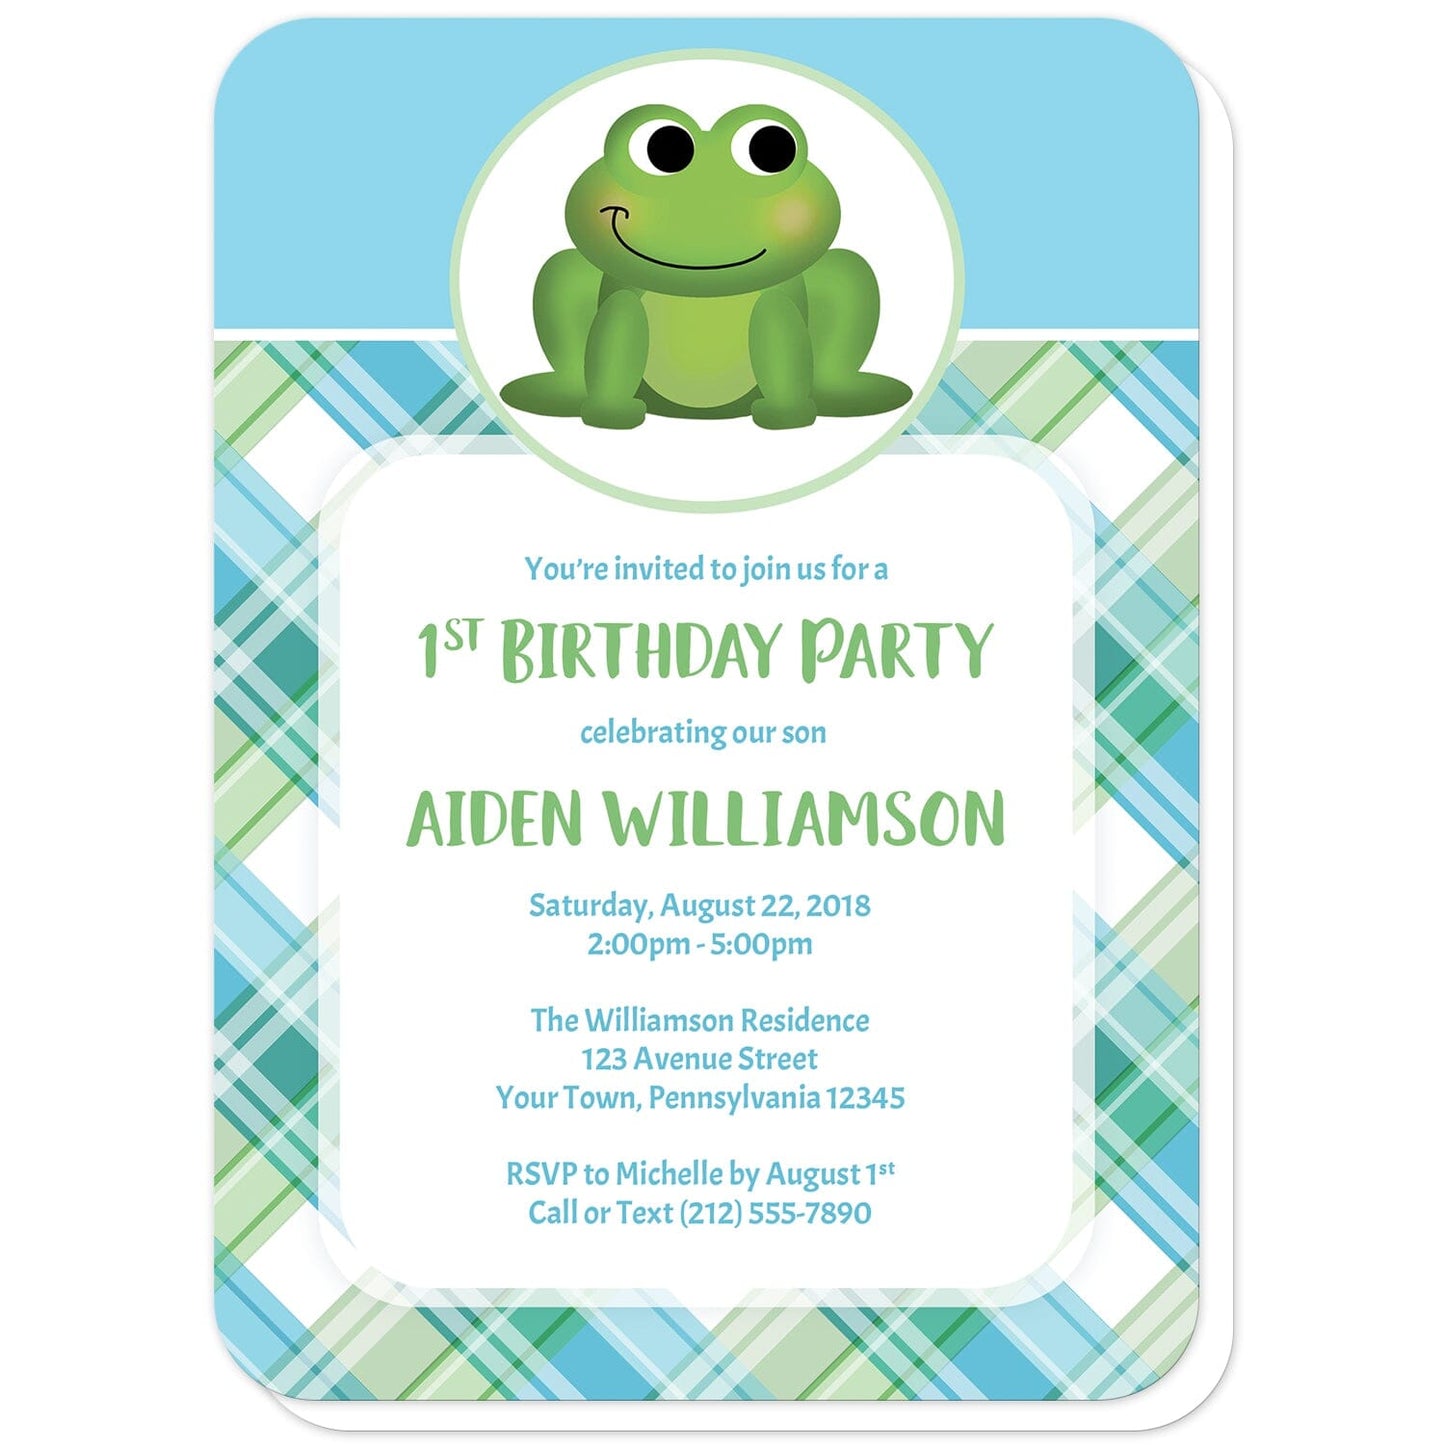 Cute Frog Green and Blue Plaid Birthday Party Invitations (with rounded corners) at Artistically Invited. Cute frog green and blue plaid birthday party invitations that are illustrated with an adorable green frog in a white and green oval over a blue background on the top, and a green and blue plaid pattern background on the bottom. Your personalized birthday party details are custom printed in green and blue over a white rectangular area over the plaid pattern.